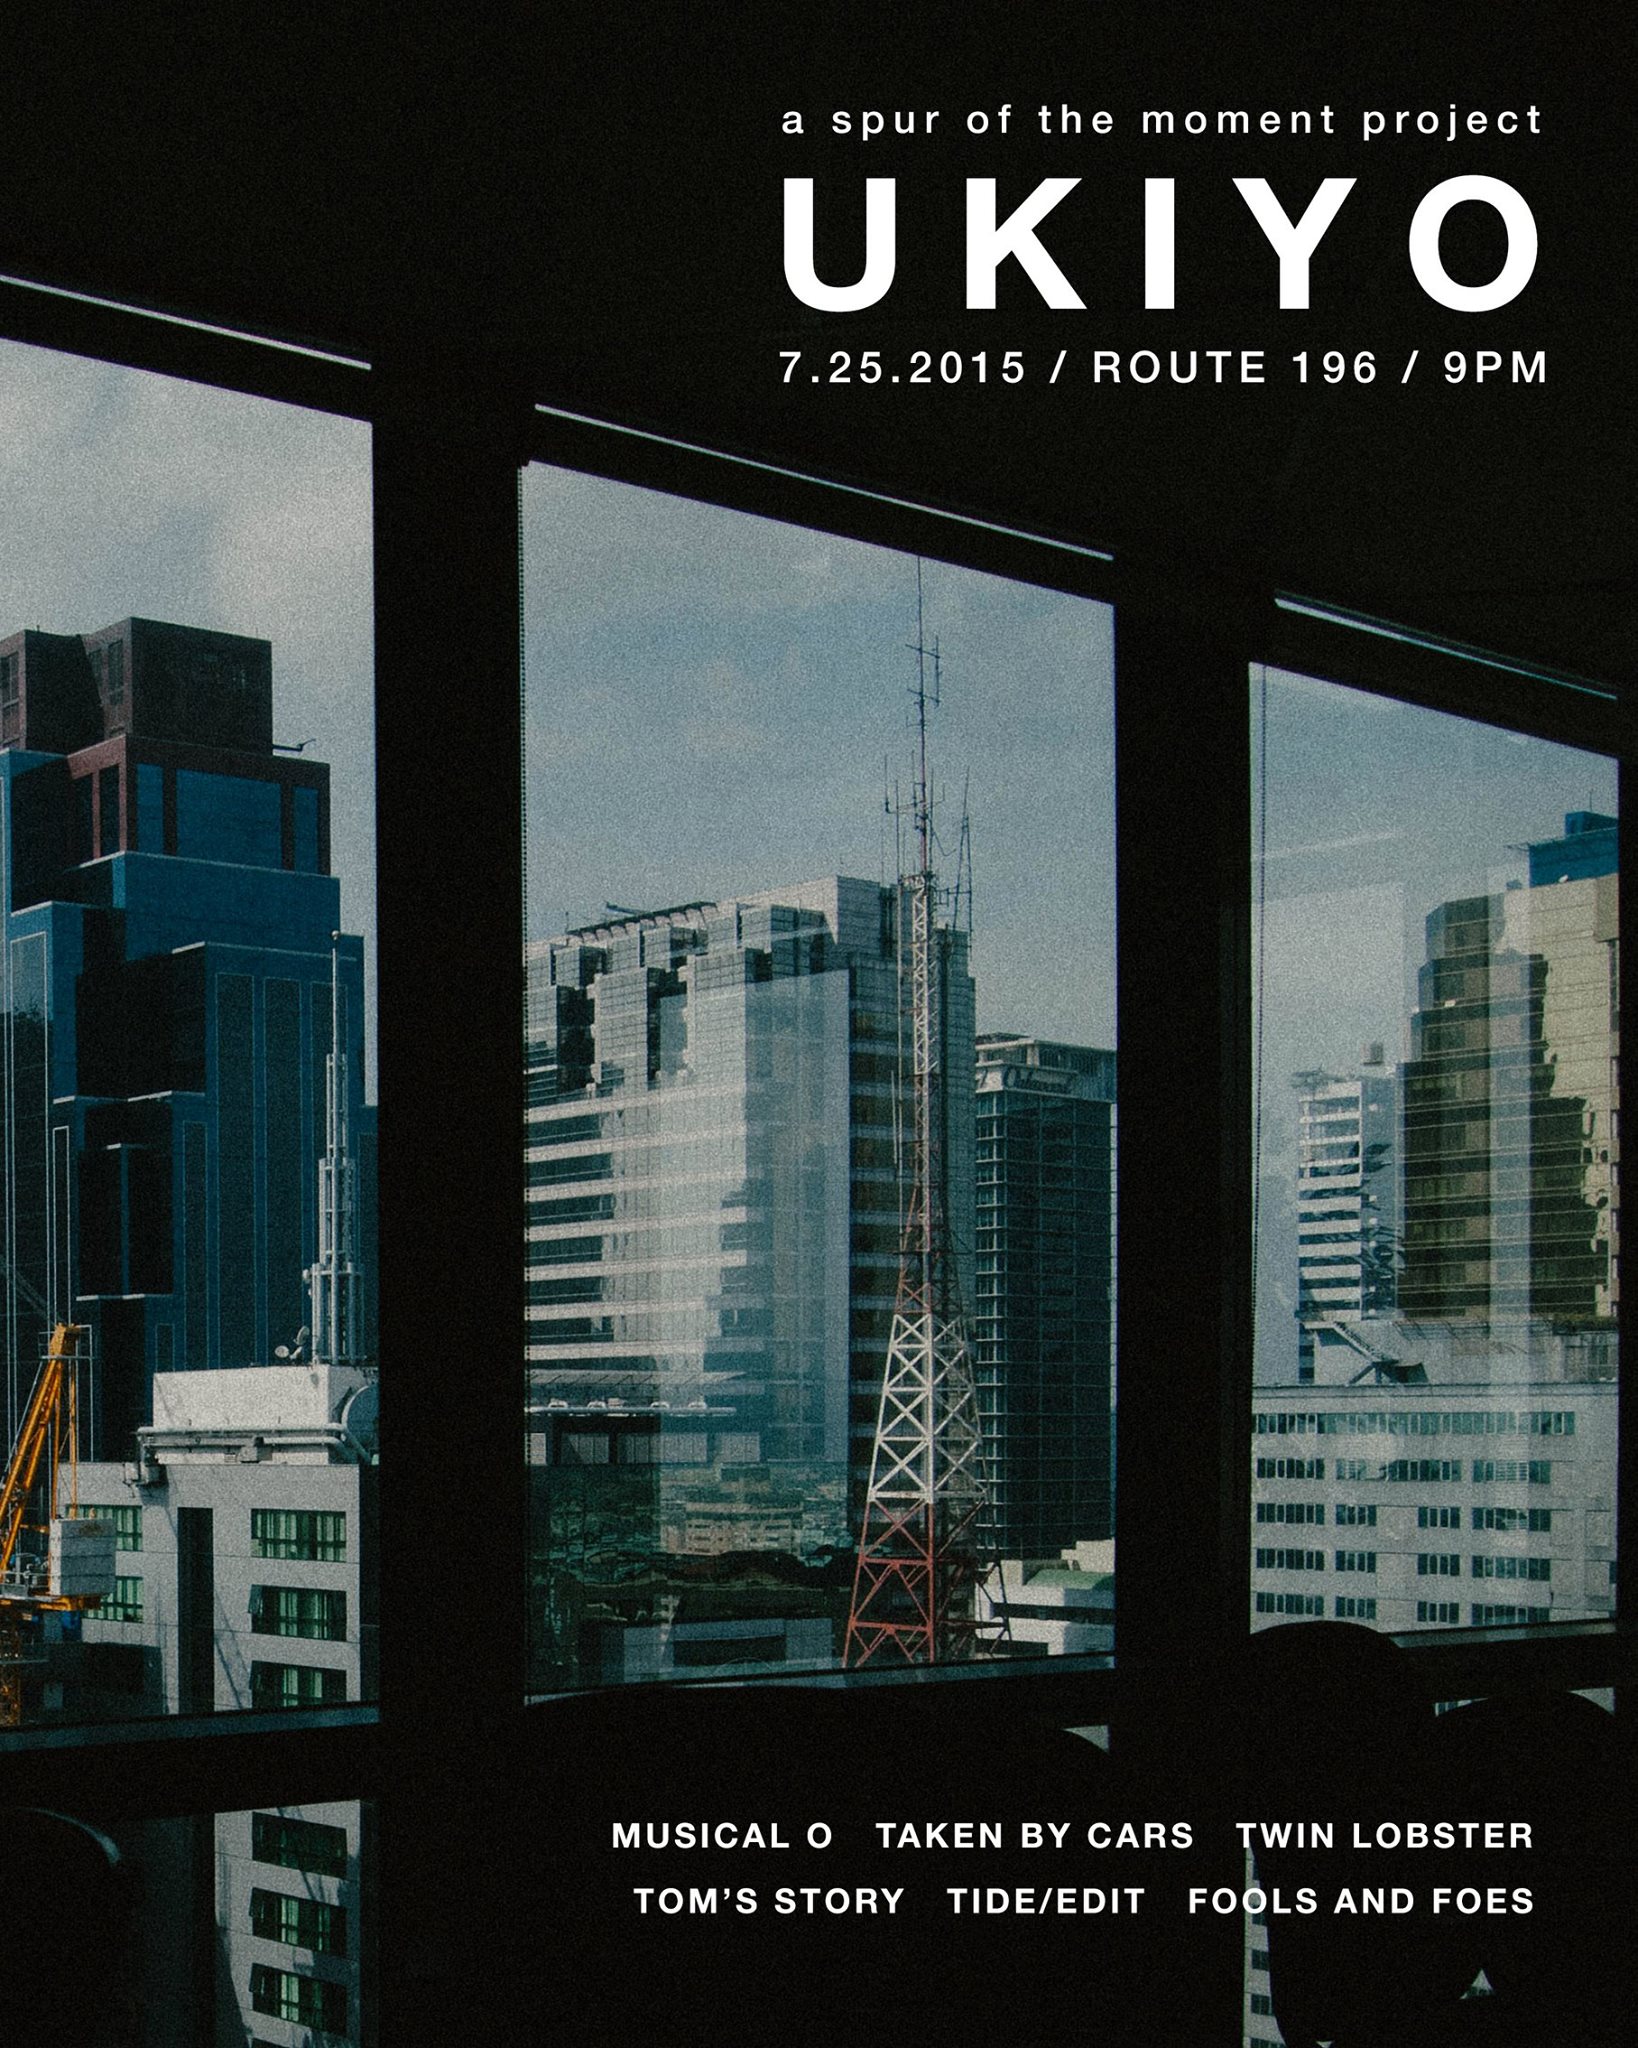 A Spur of the Moment Project presents: UKIYO     Saturday, July 25     at 9:00pm     Next Week · 89°F / 75°F Chance of a Thunderstorm     	     Show Map     Route 196 Bar     196-A Katipunan Avenue Extension, Blue Ridge A, Quezon City, Philippines A Spur of the Moment Project presents UKIYO featuring Musical O | Taken by Cars | Twin Lobster Tom's Story | tide/edit | Fools and Foes Catch these bands on July 25, Saturday at Route 196, Katipunan! Entrance at P200 comes with a free drink. Event starts at 9:00.